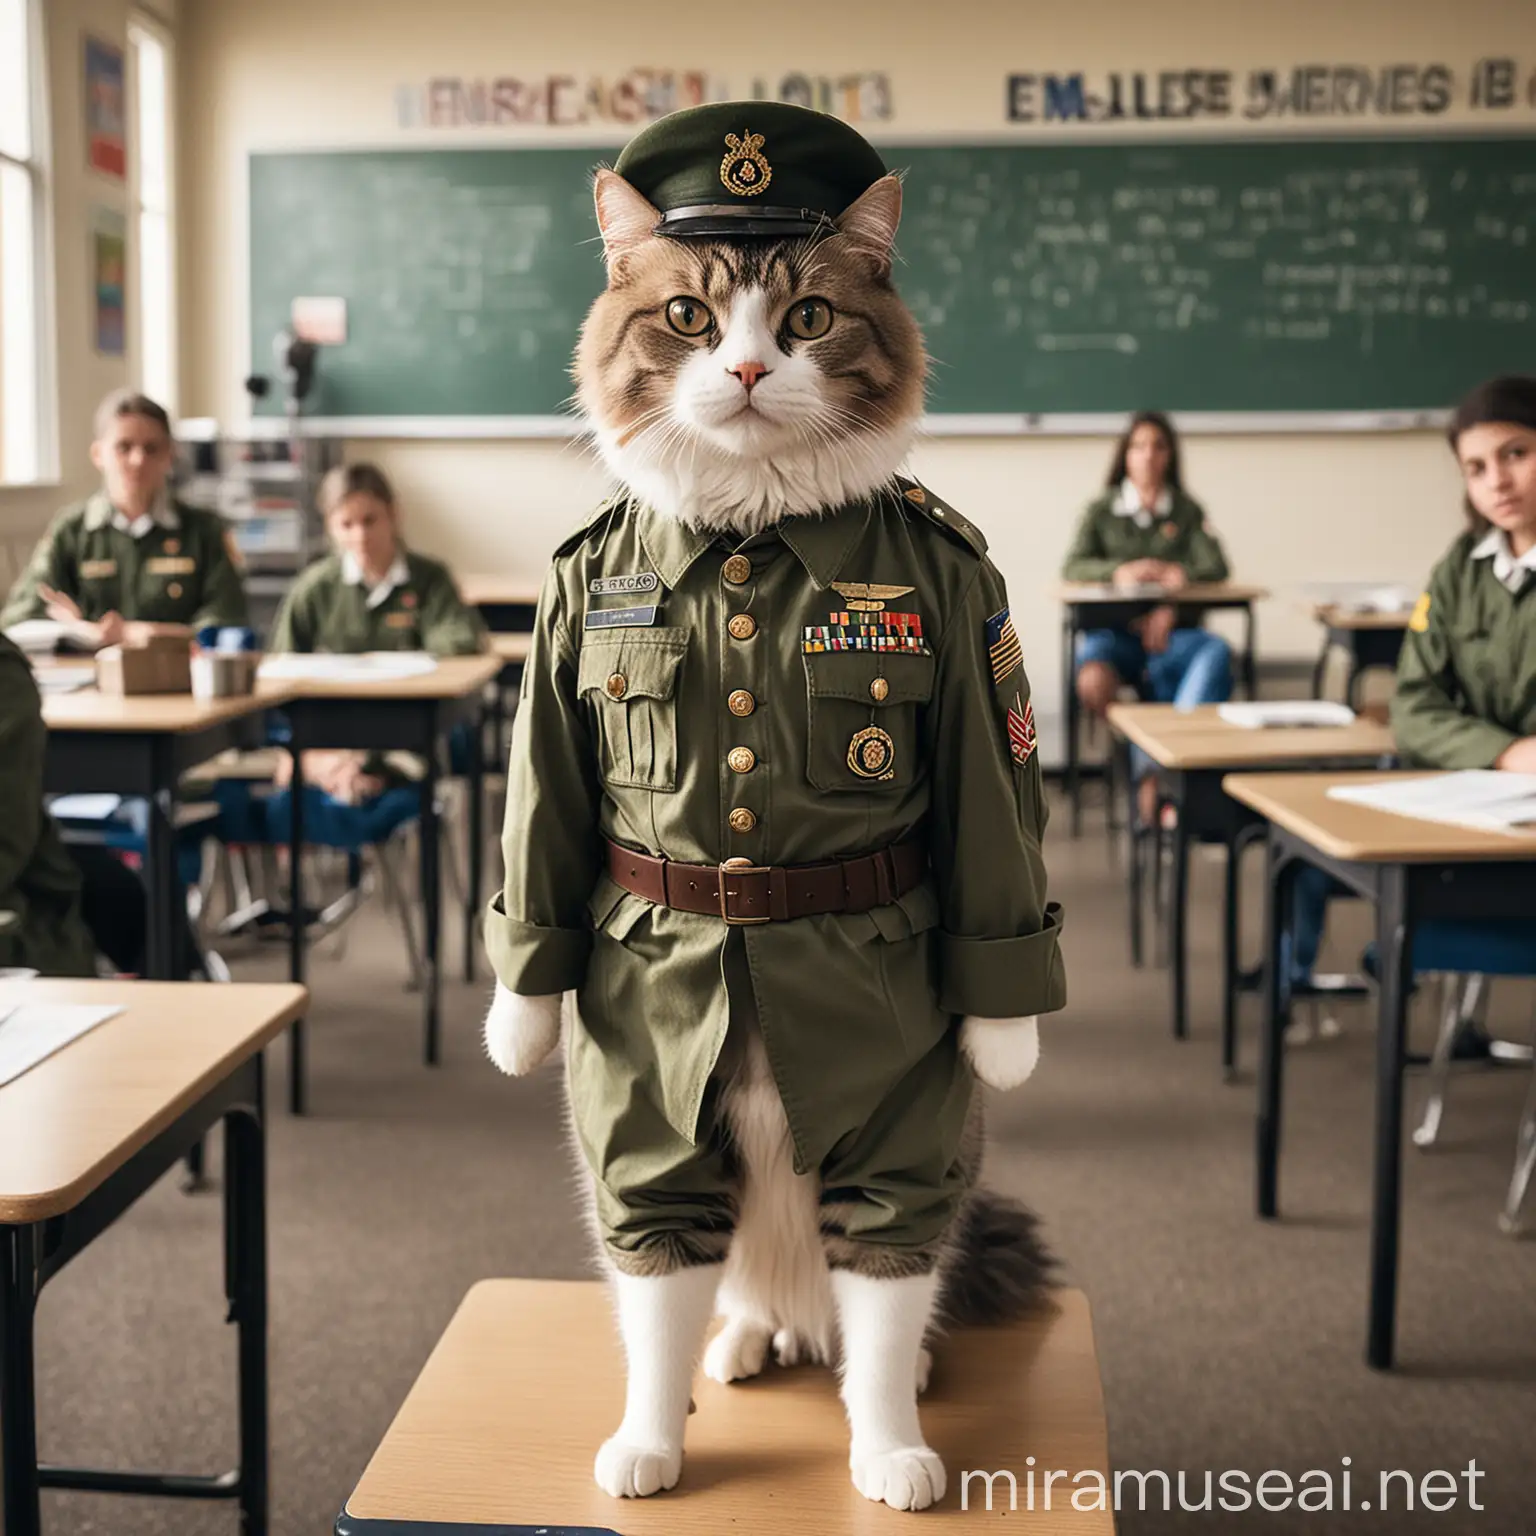 A cat with an army uniform standing in a classroom fill with students teaching biology